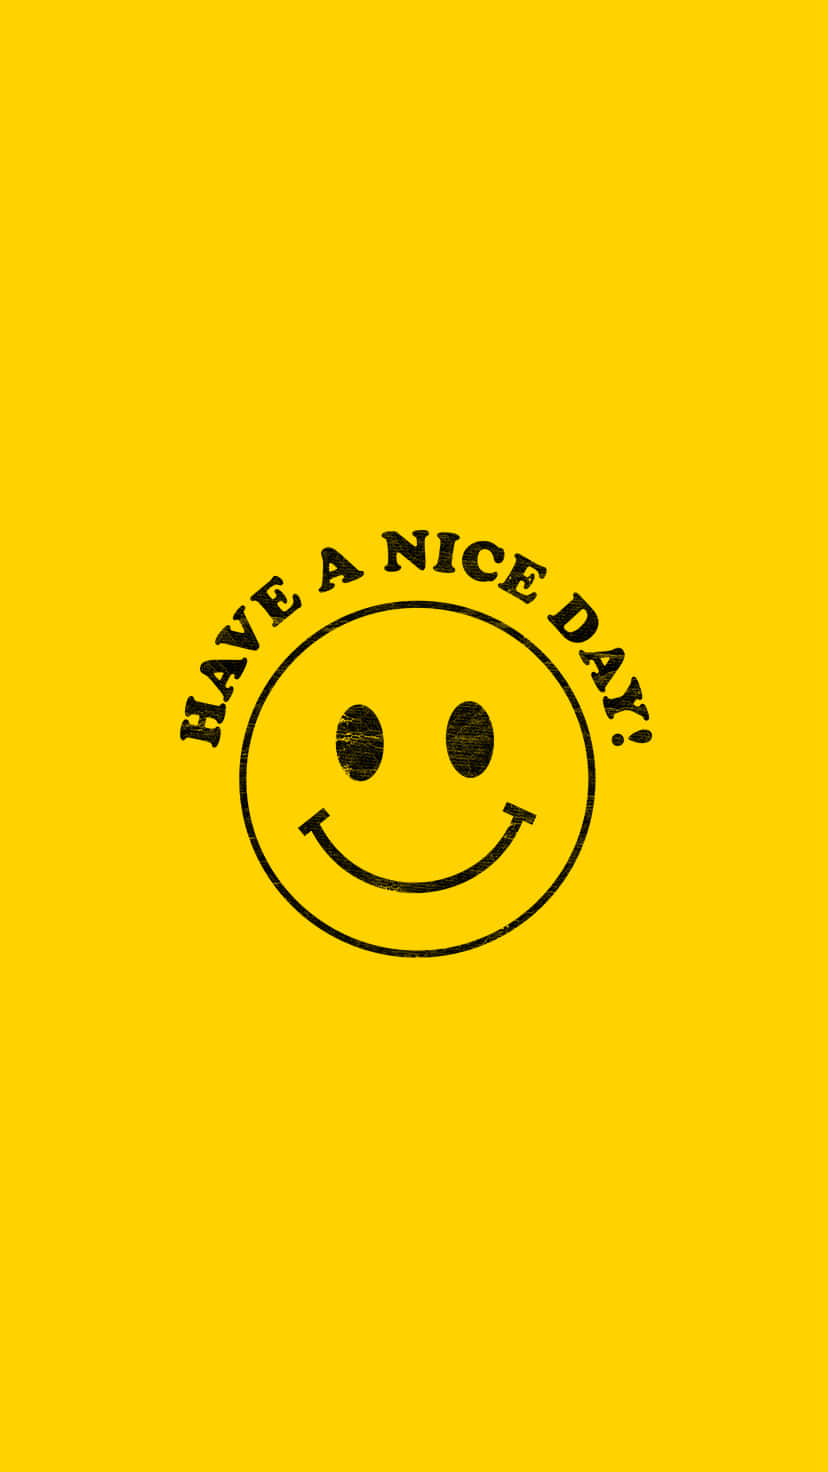 Have A Nice Day Smiley Face Yellow Background Wallpaper